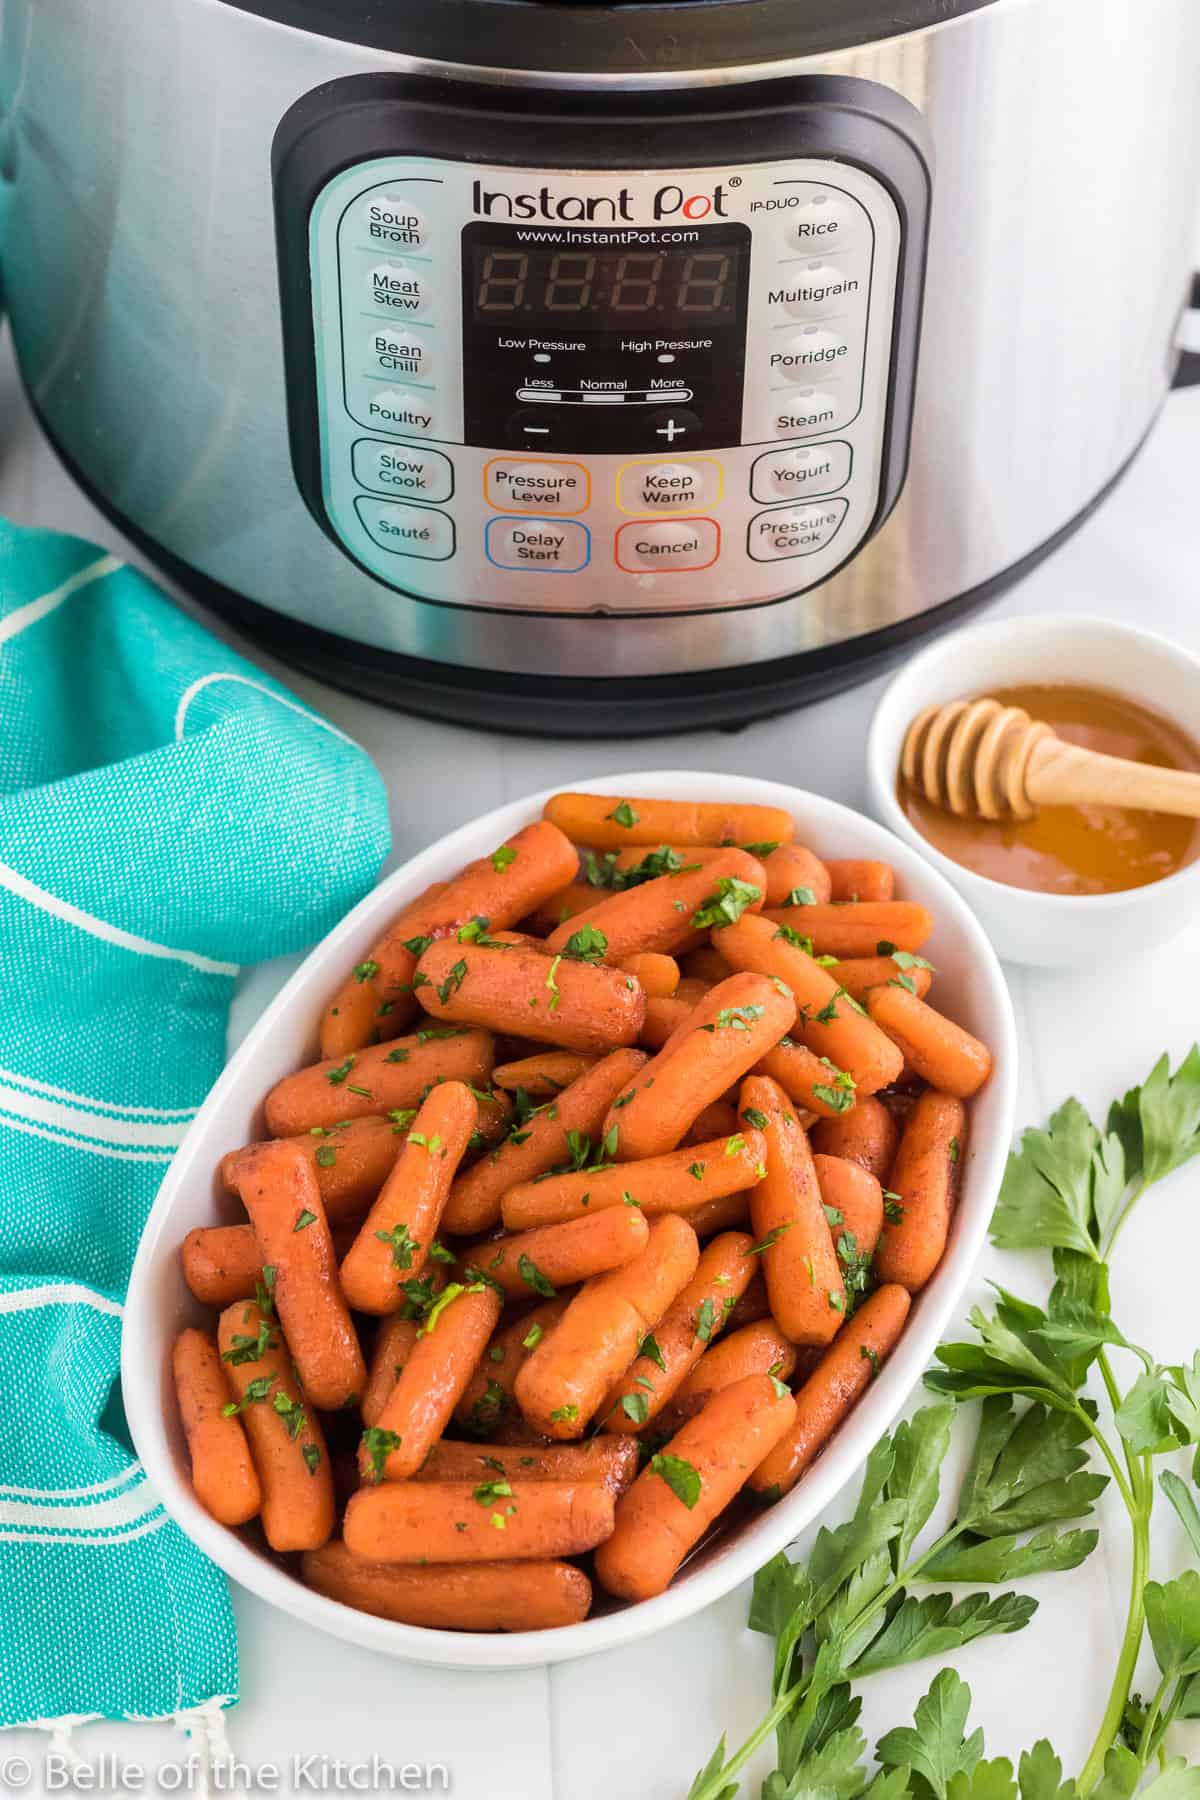 a bowl of carrots next to an instant pot